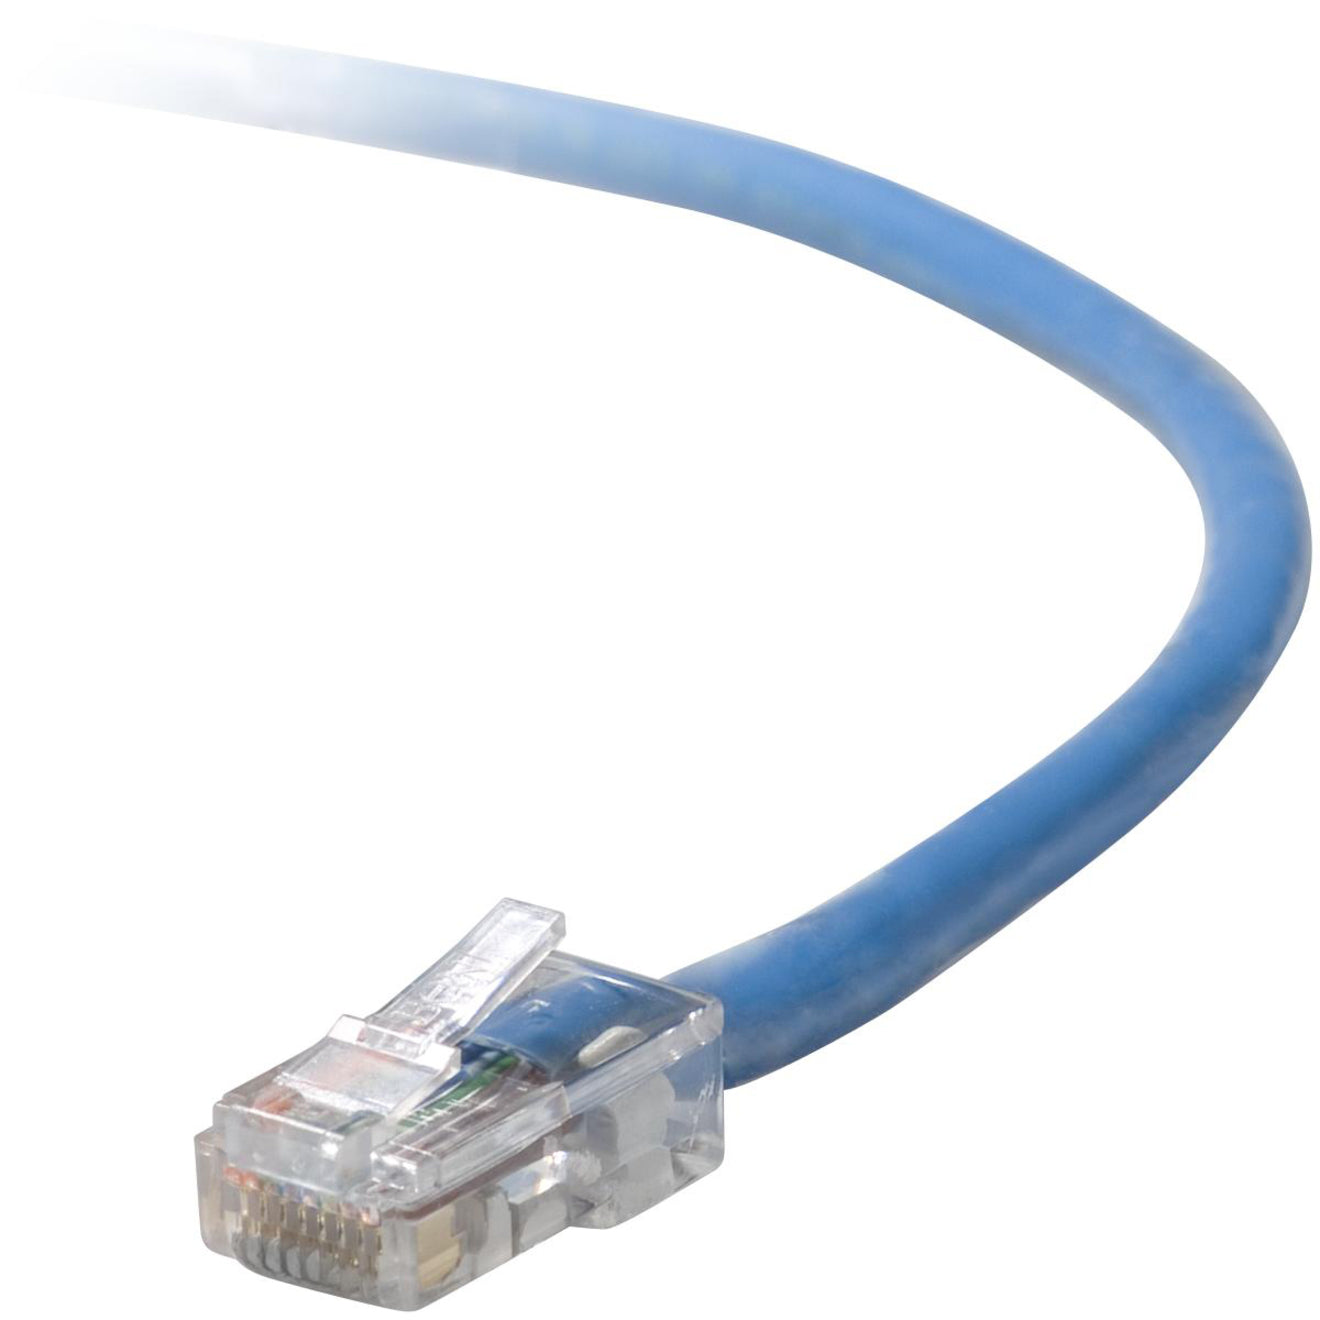 Belkin A3L791-12-BLU-S RJ45 Category 5e Snagless Patch Cable, 12 ft, Copper Conductor, Blue